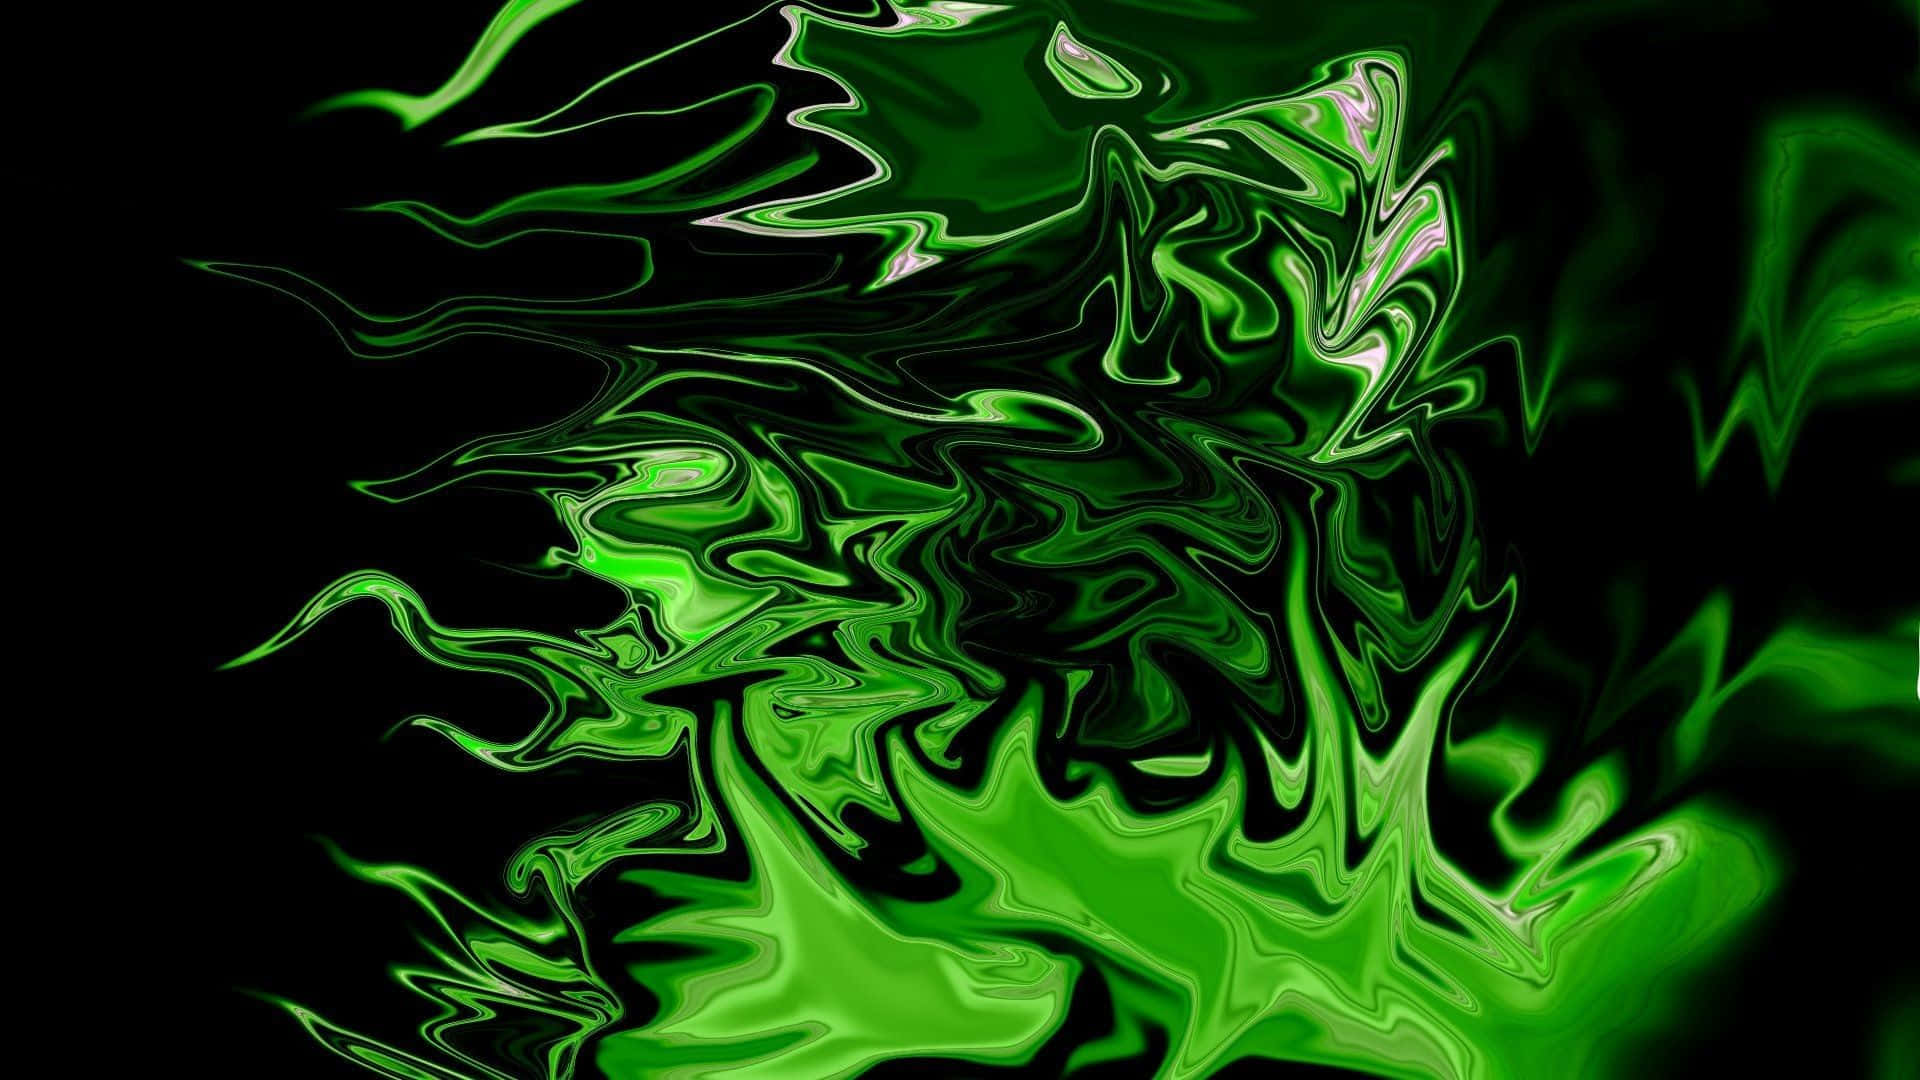 Illuminated by the vibrant colors of neon green and black, this desktop wallpaper evokes feelings of energy and youth. Wallpaper